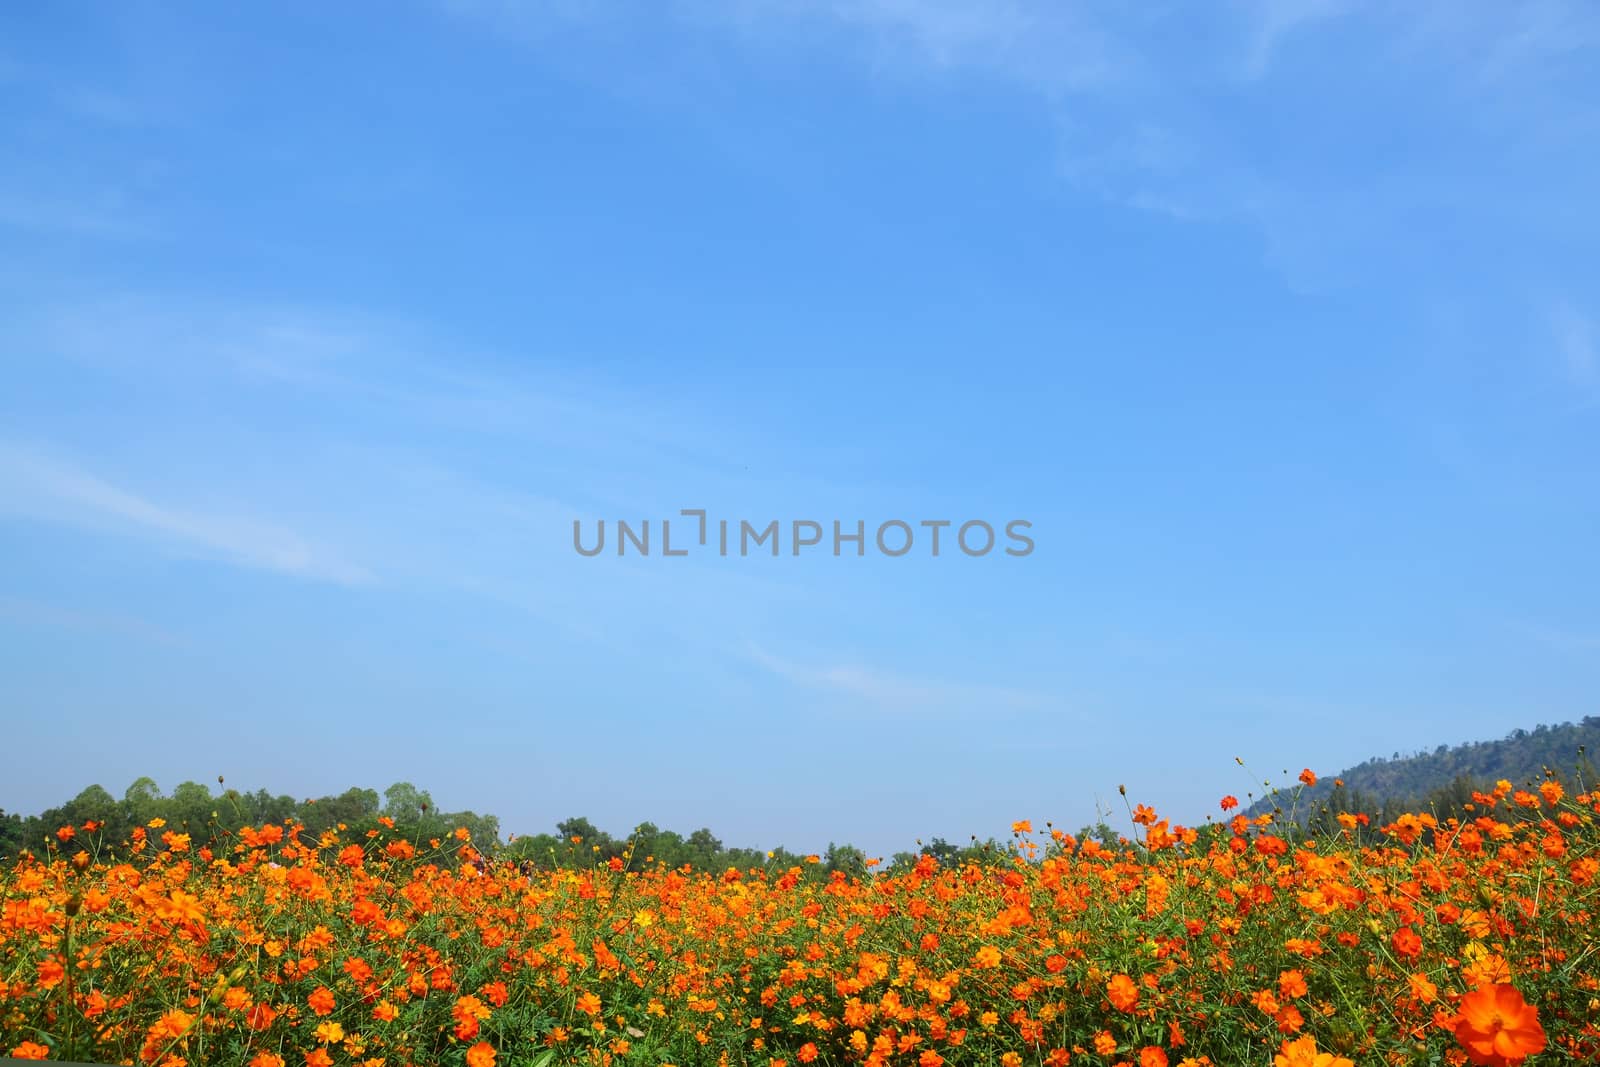 The cosmos flower field by ideation90